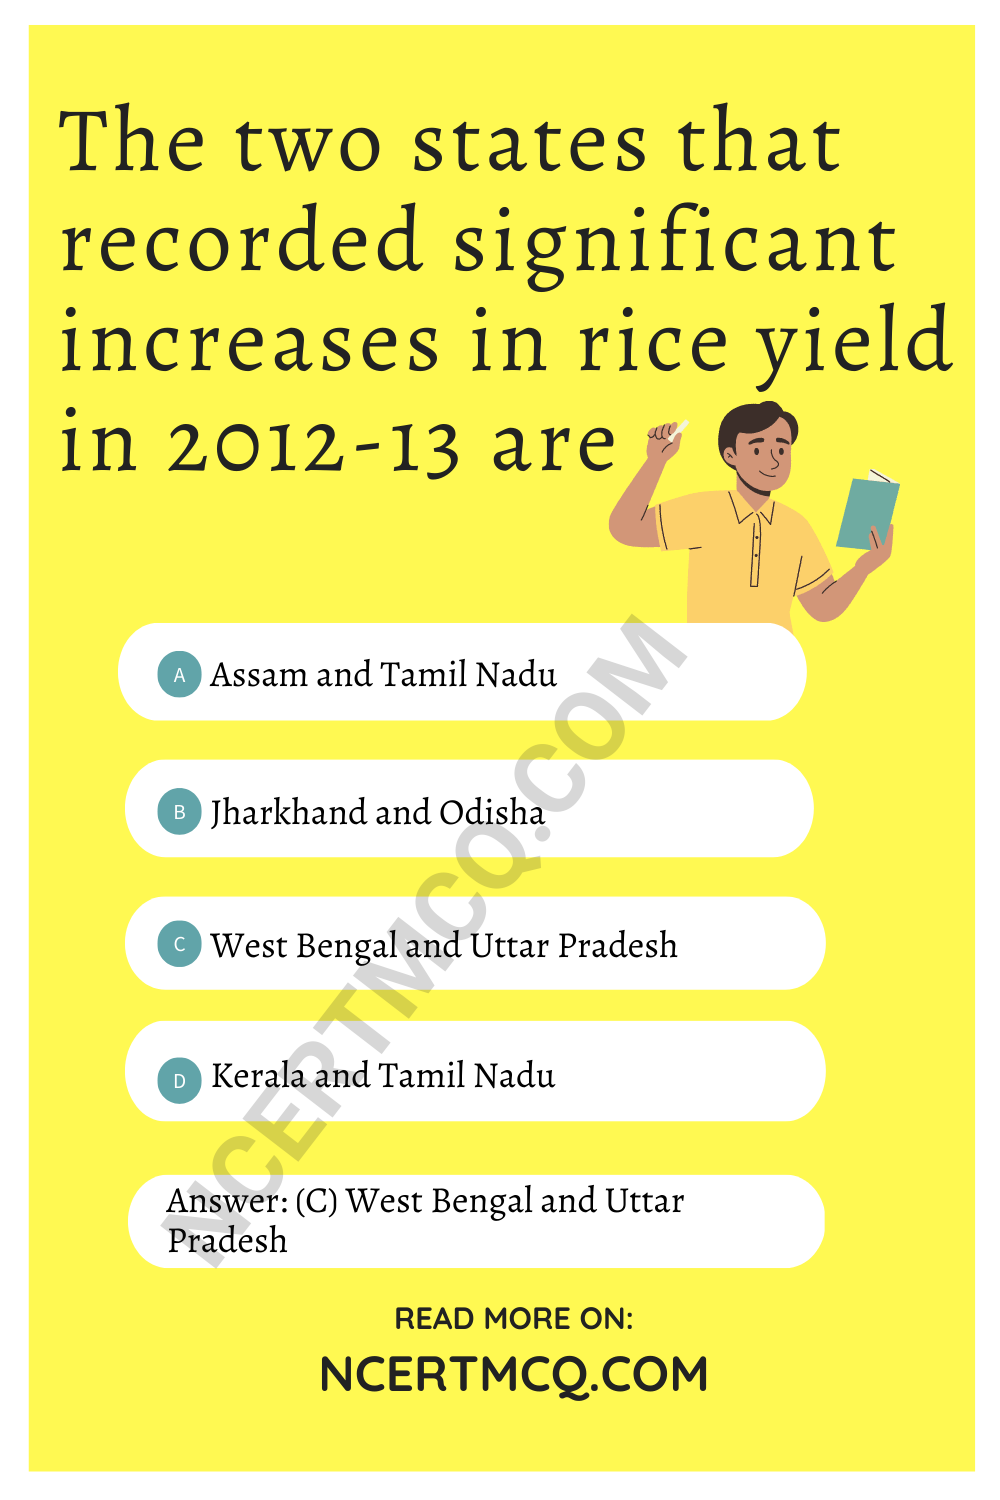 The two states that recorded significant increases in rice yield in 2012-13 are